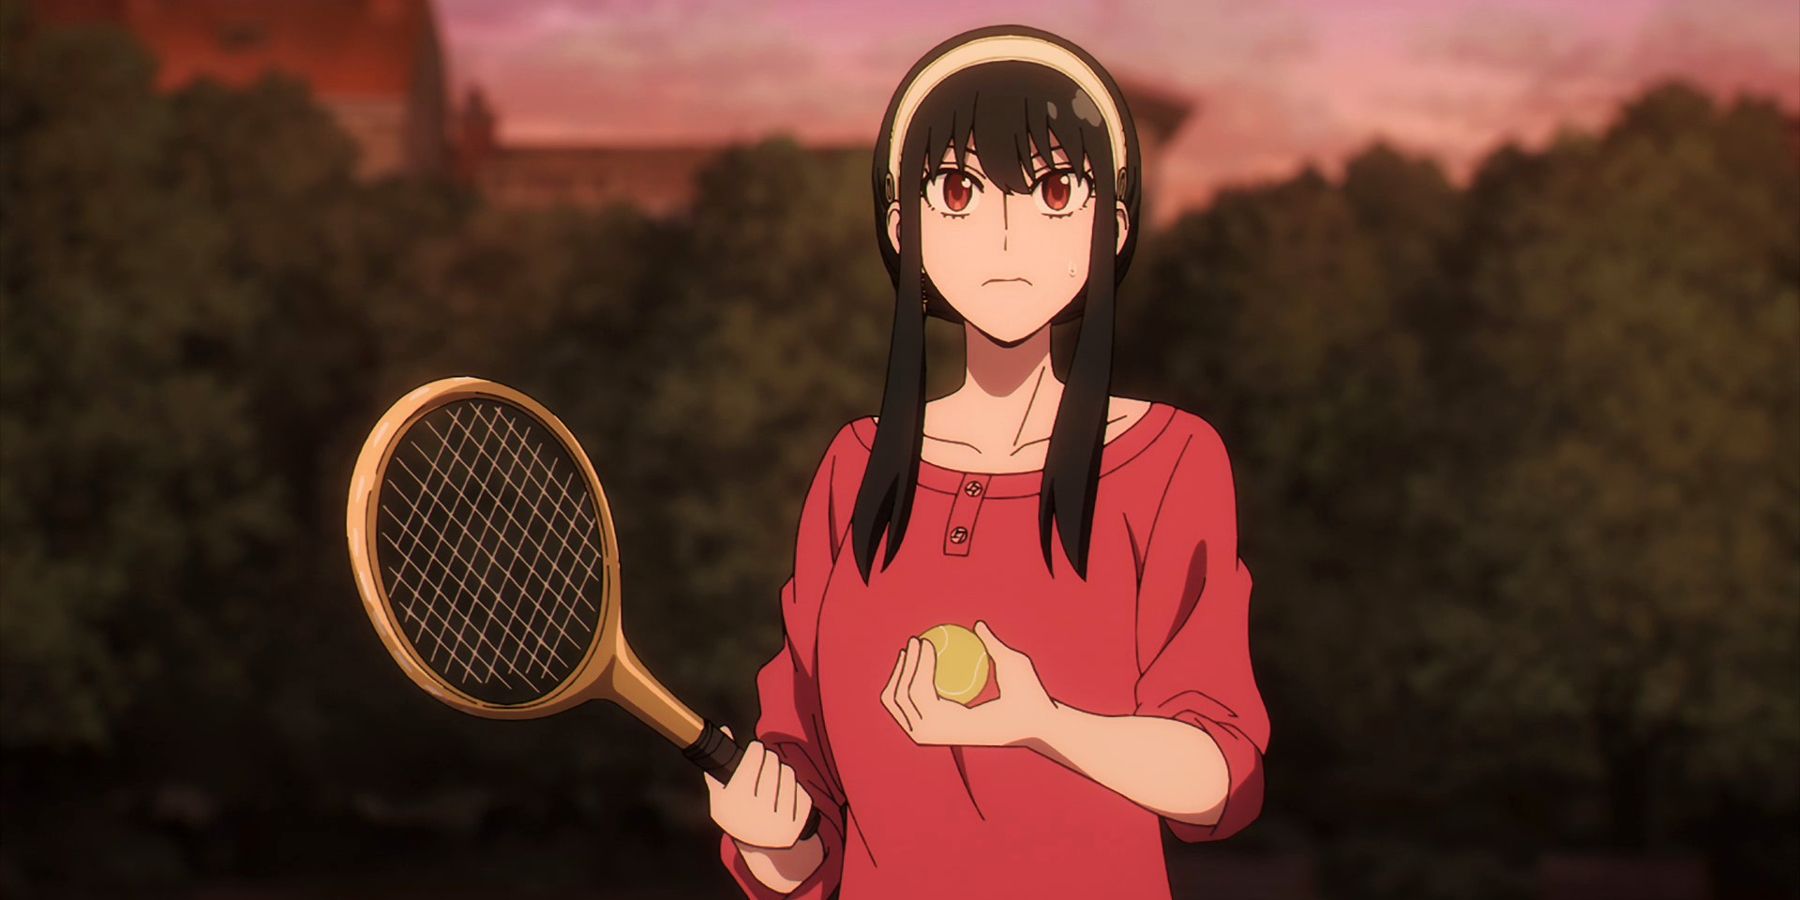 Yor Forger playing tennis in Spy x Family Ep 23.